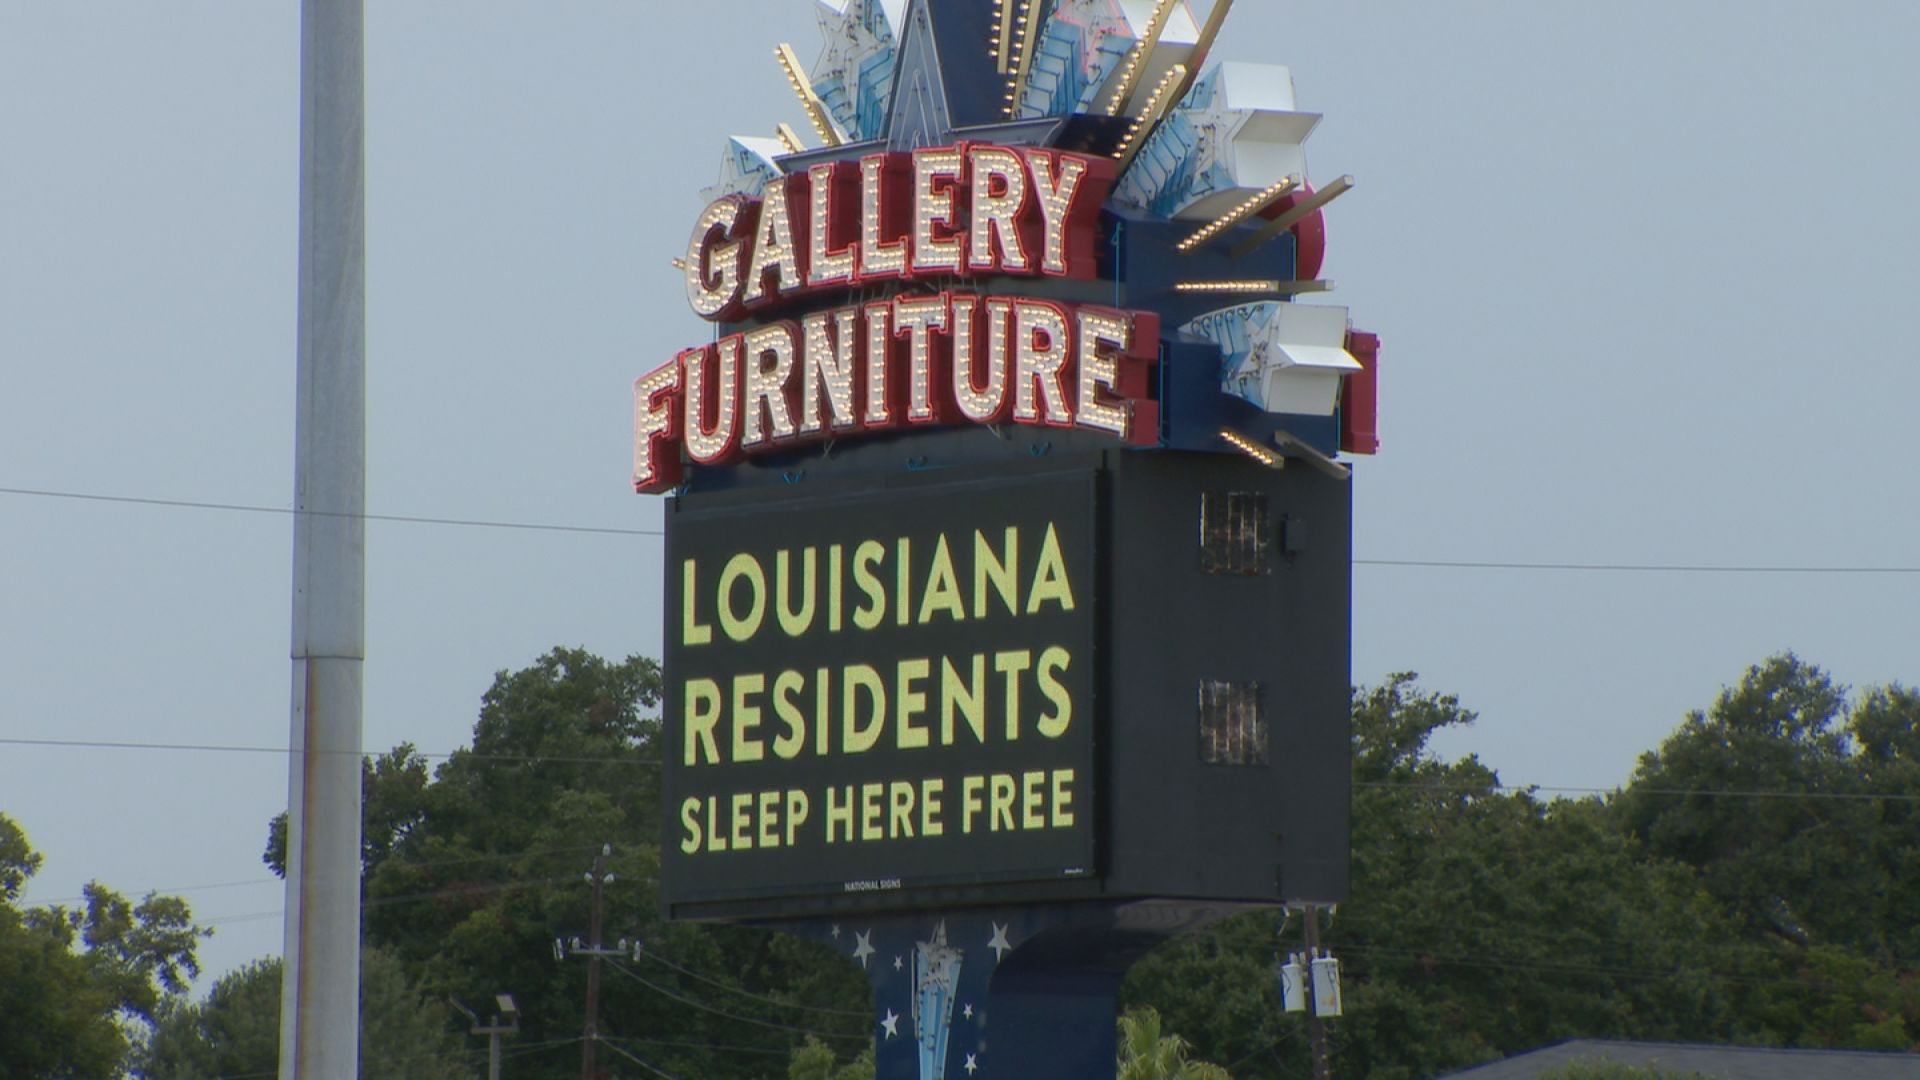 Gallery Furniture gives donations to local organizations helping with Harvey  relief